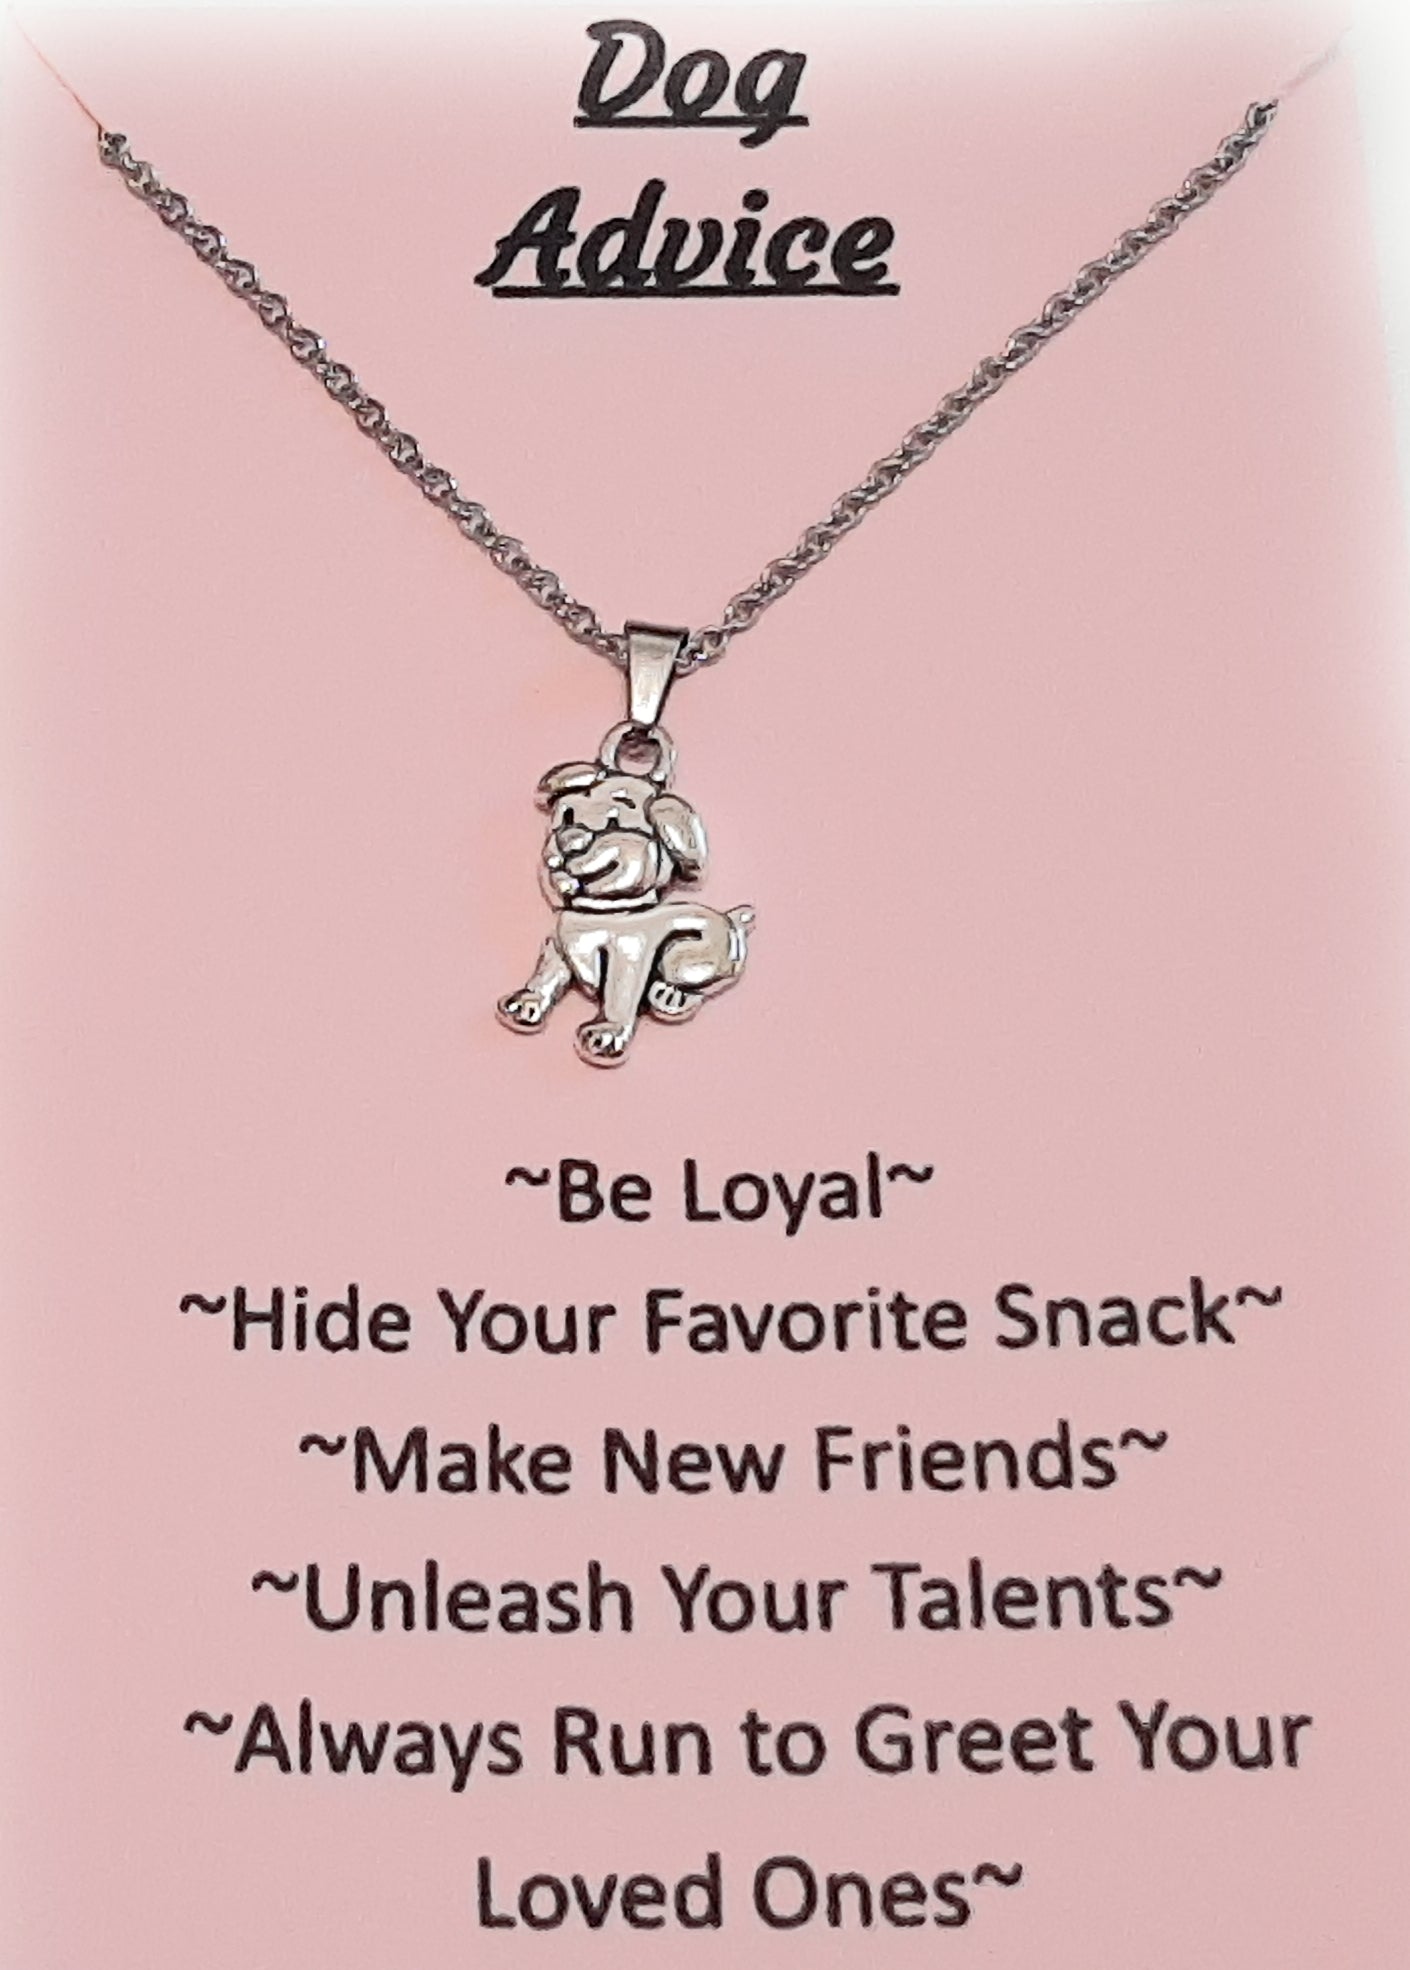 Puppy Dog Charm Pendant Necklace with Animal Advice Card (What advice would a Dog give?)